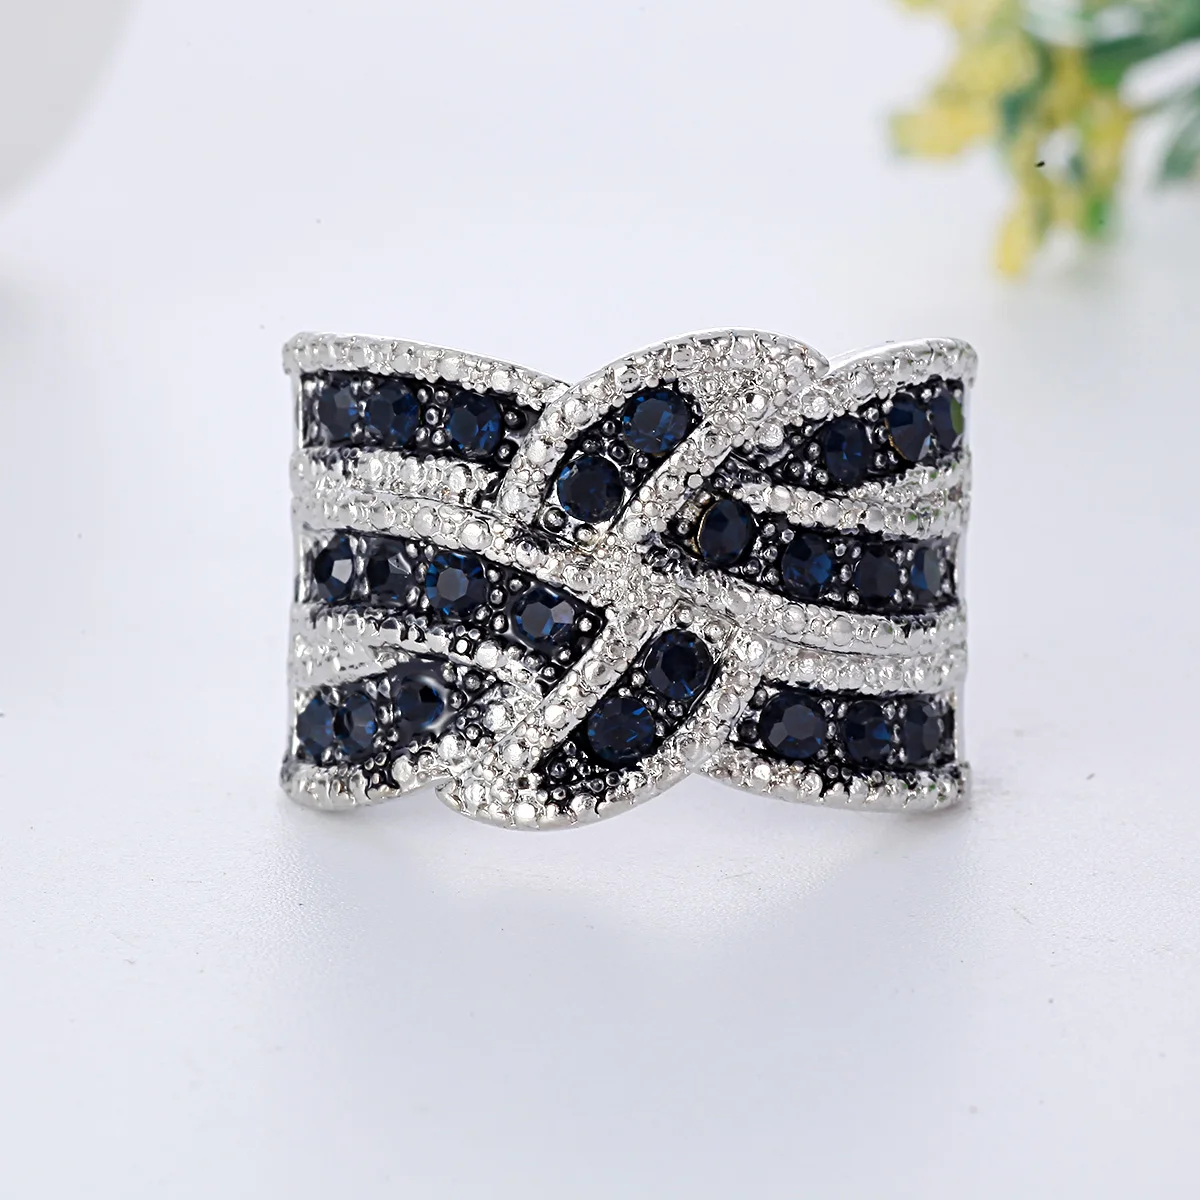 

Women's Ring Black Stone Silver Color Rings for Women Classic Jewelry Pave Engagement Luxury Bague Femme Anillos Mujer